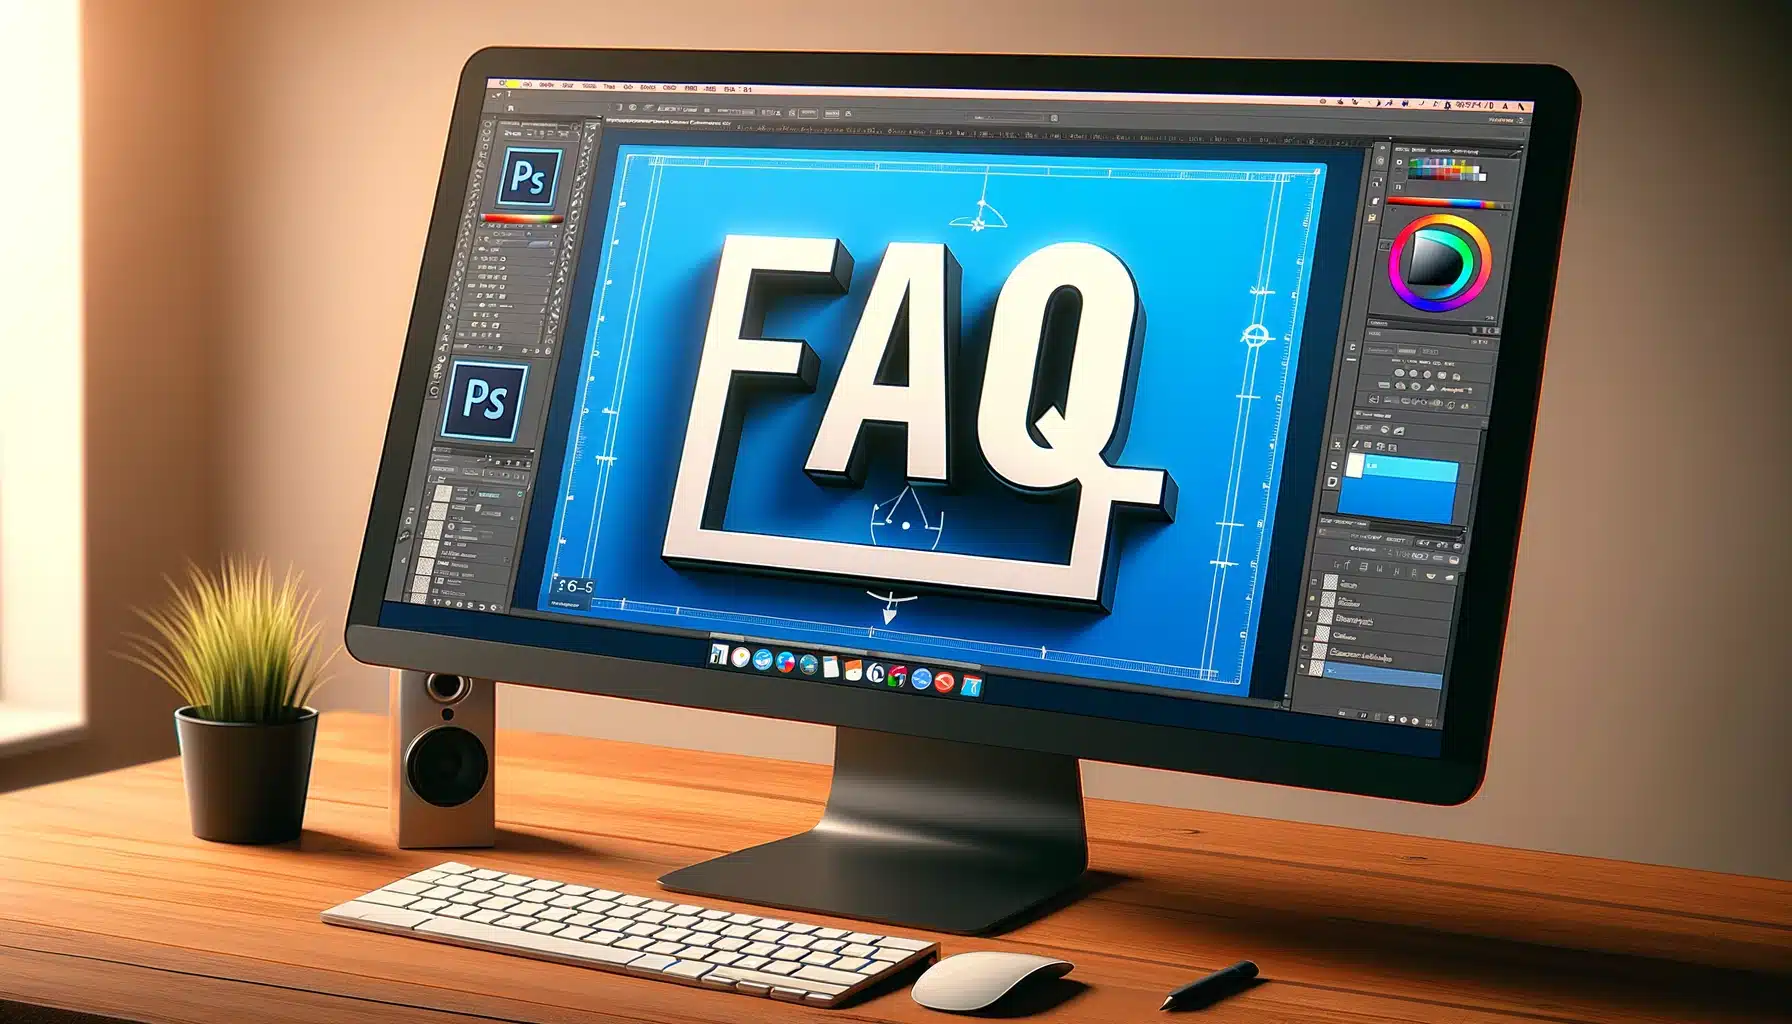 "A computer screen displaying an Adobe Photoshop interface with the shape tool in use, and 'FAQ' prominently shown on the screen."